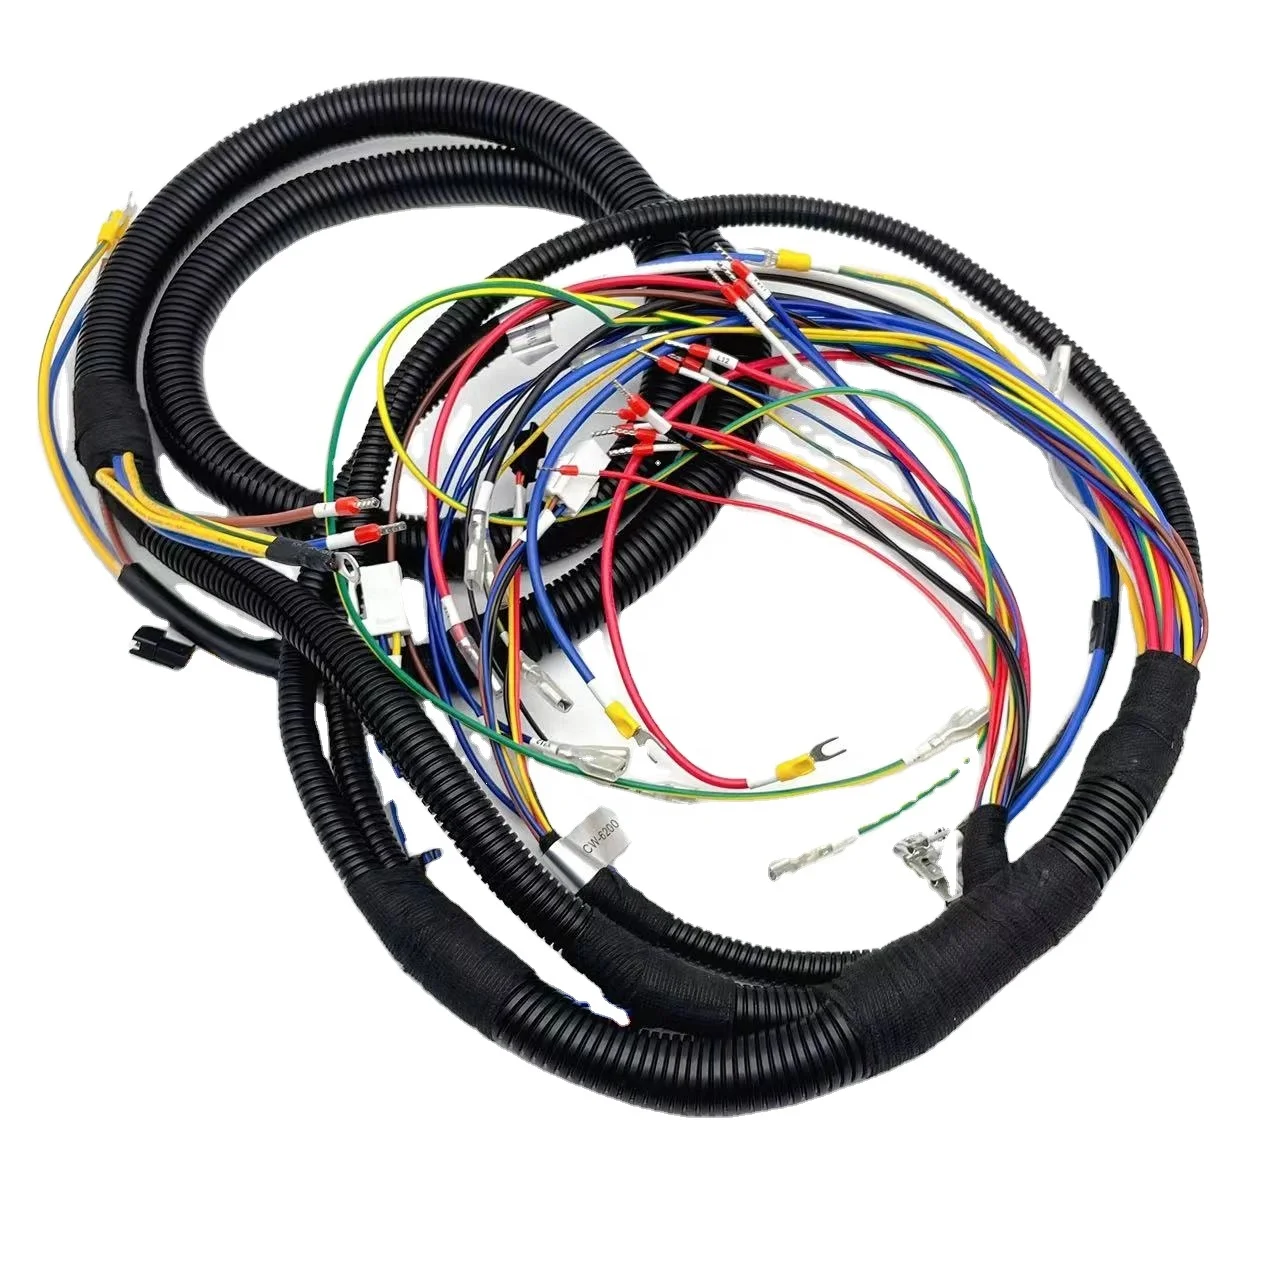 Customized electric cable assembly motor wiring harness car auto atv engine wire harness fuel injector cable with terminal (1600432958349)